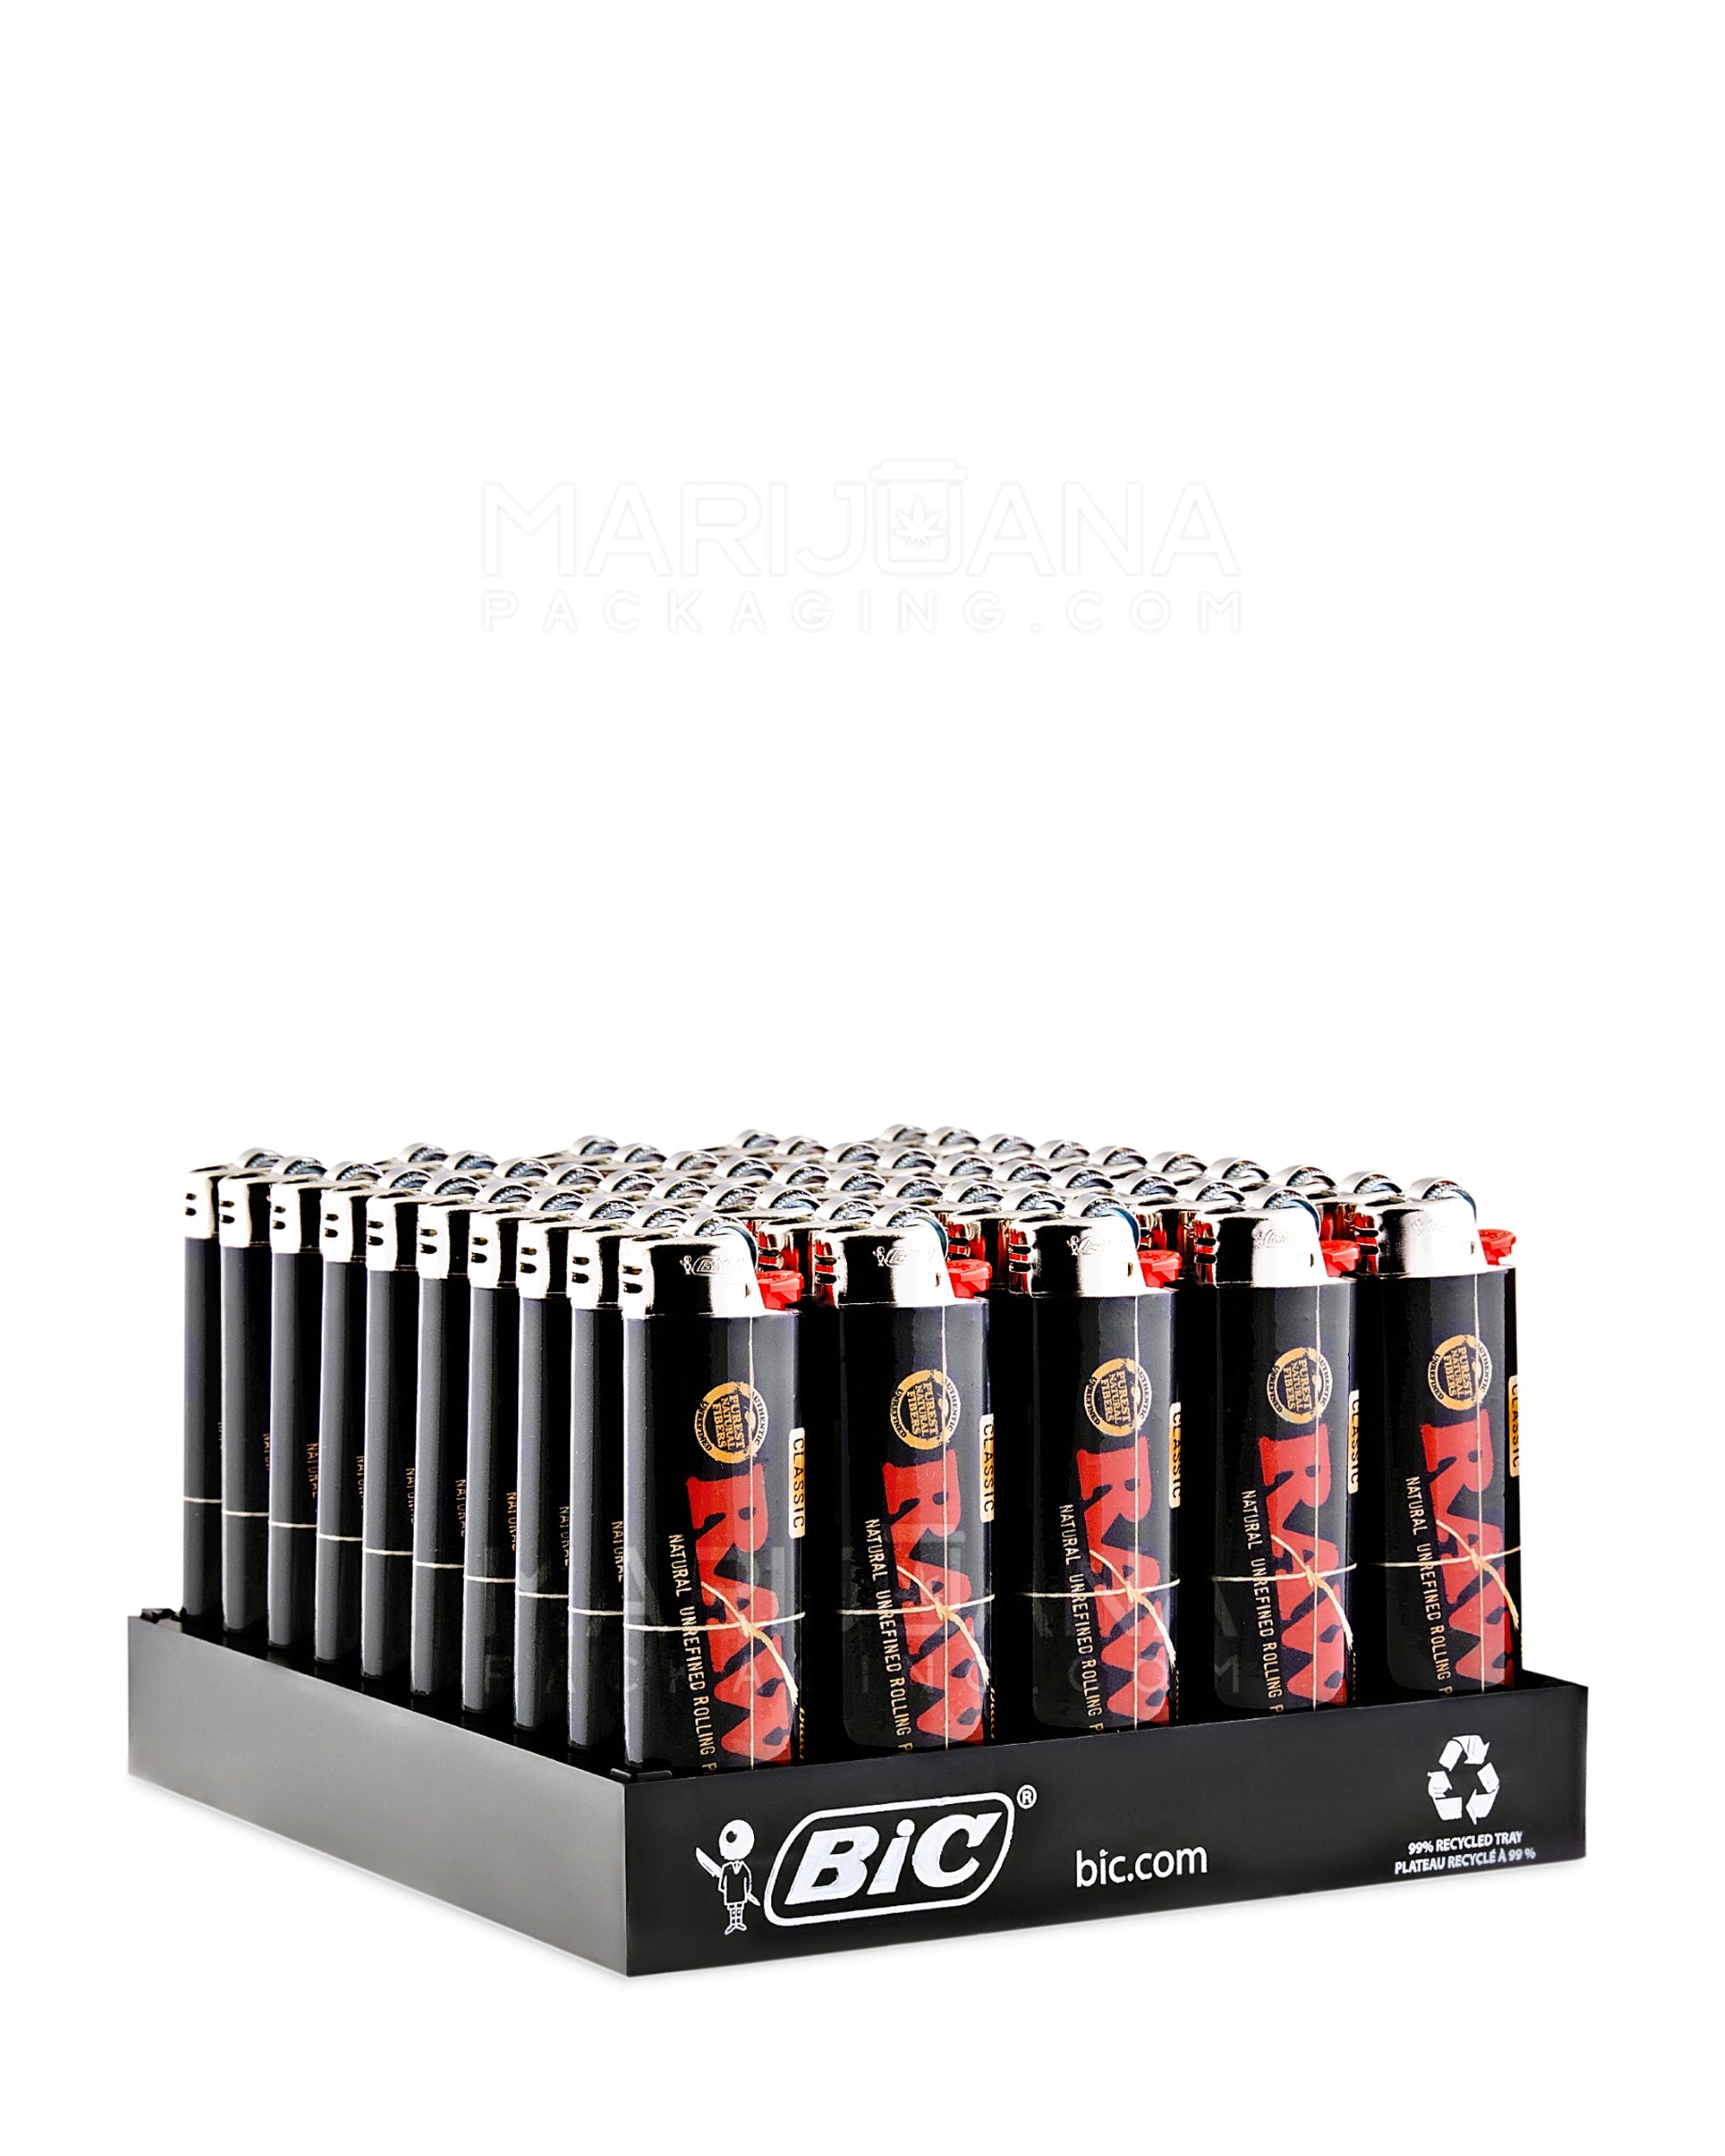 BIC | 'Retail Display' RAW Black Edition Lighters - 50 Count